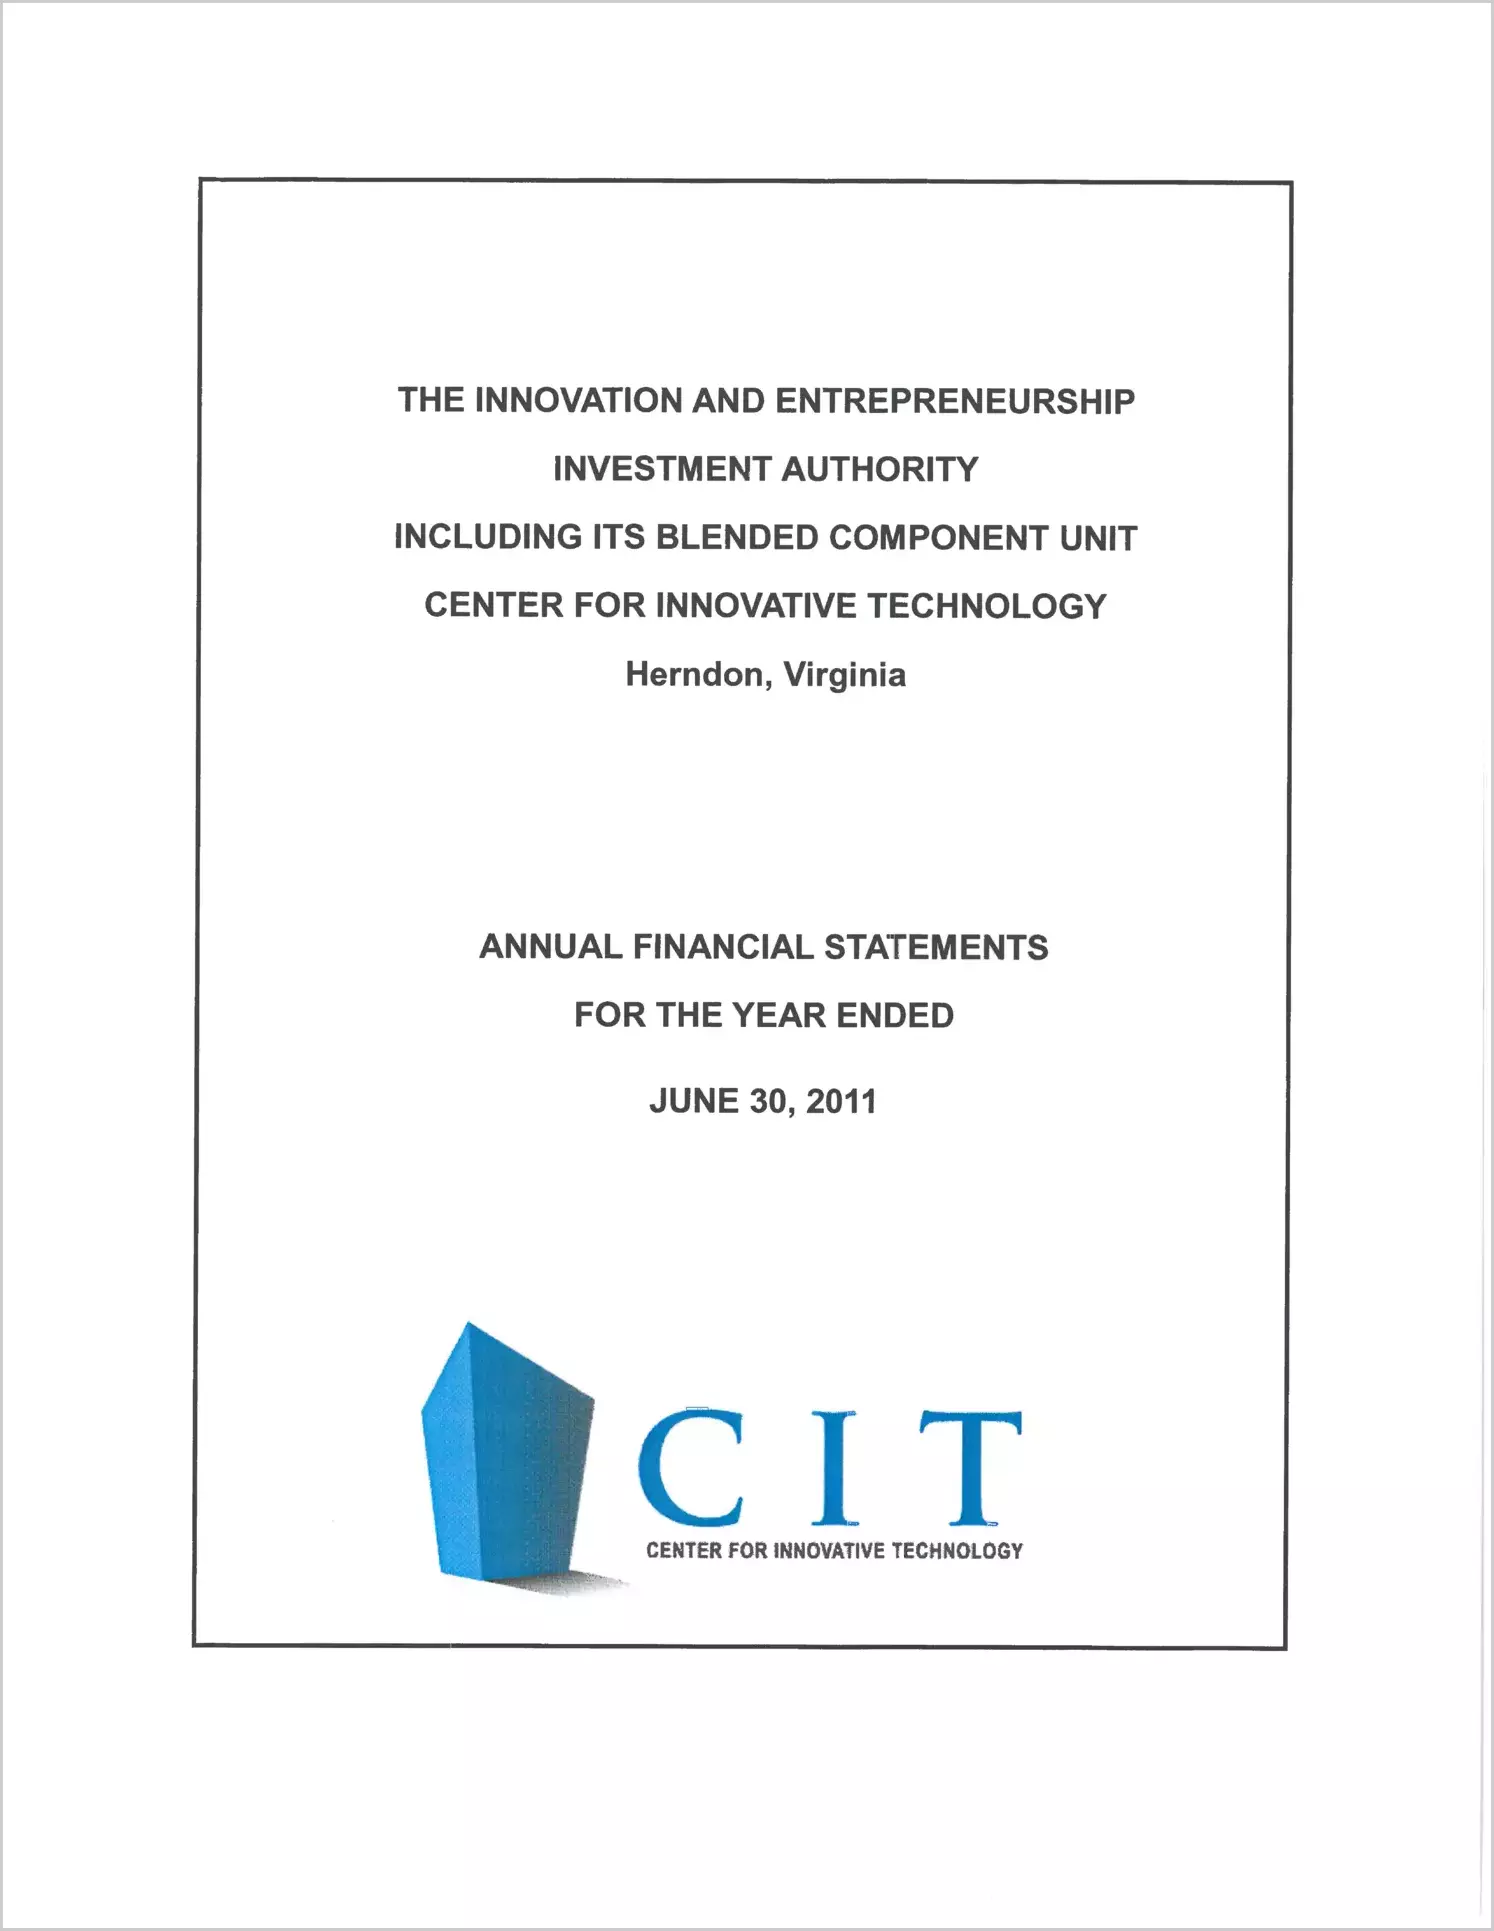 Innovation and Entrepreneurship Investment Authority Including Its Blended Component Unit Center for Innovative Technology  Financial Statement Report for the year ended June 30, 2011